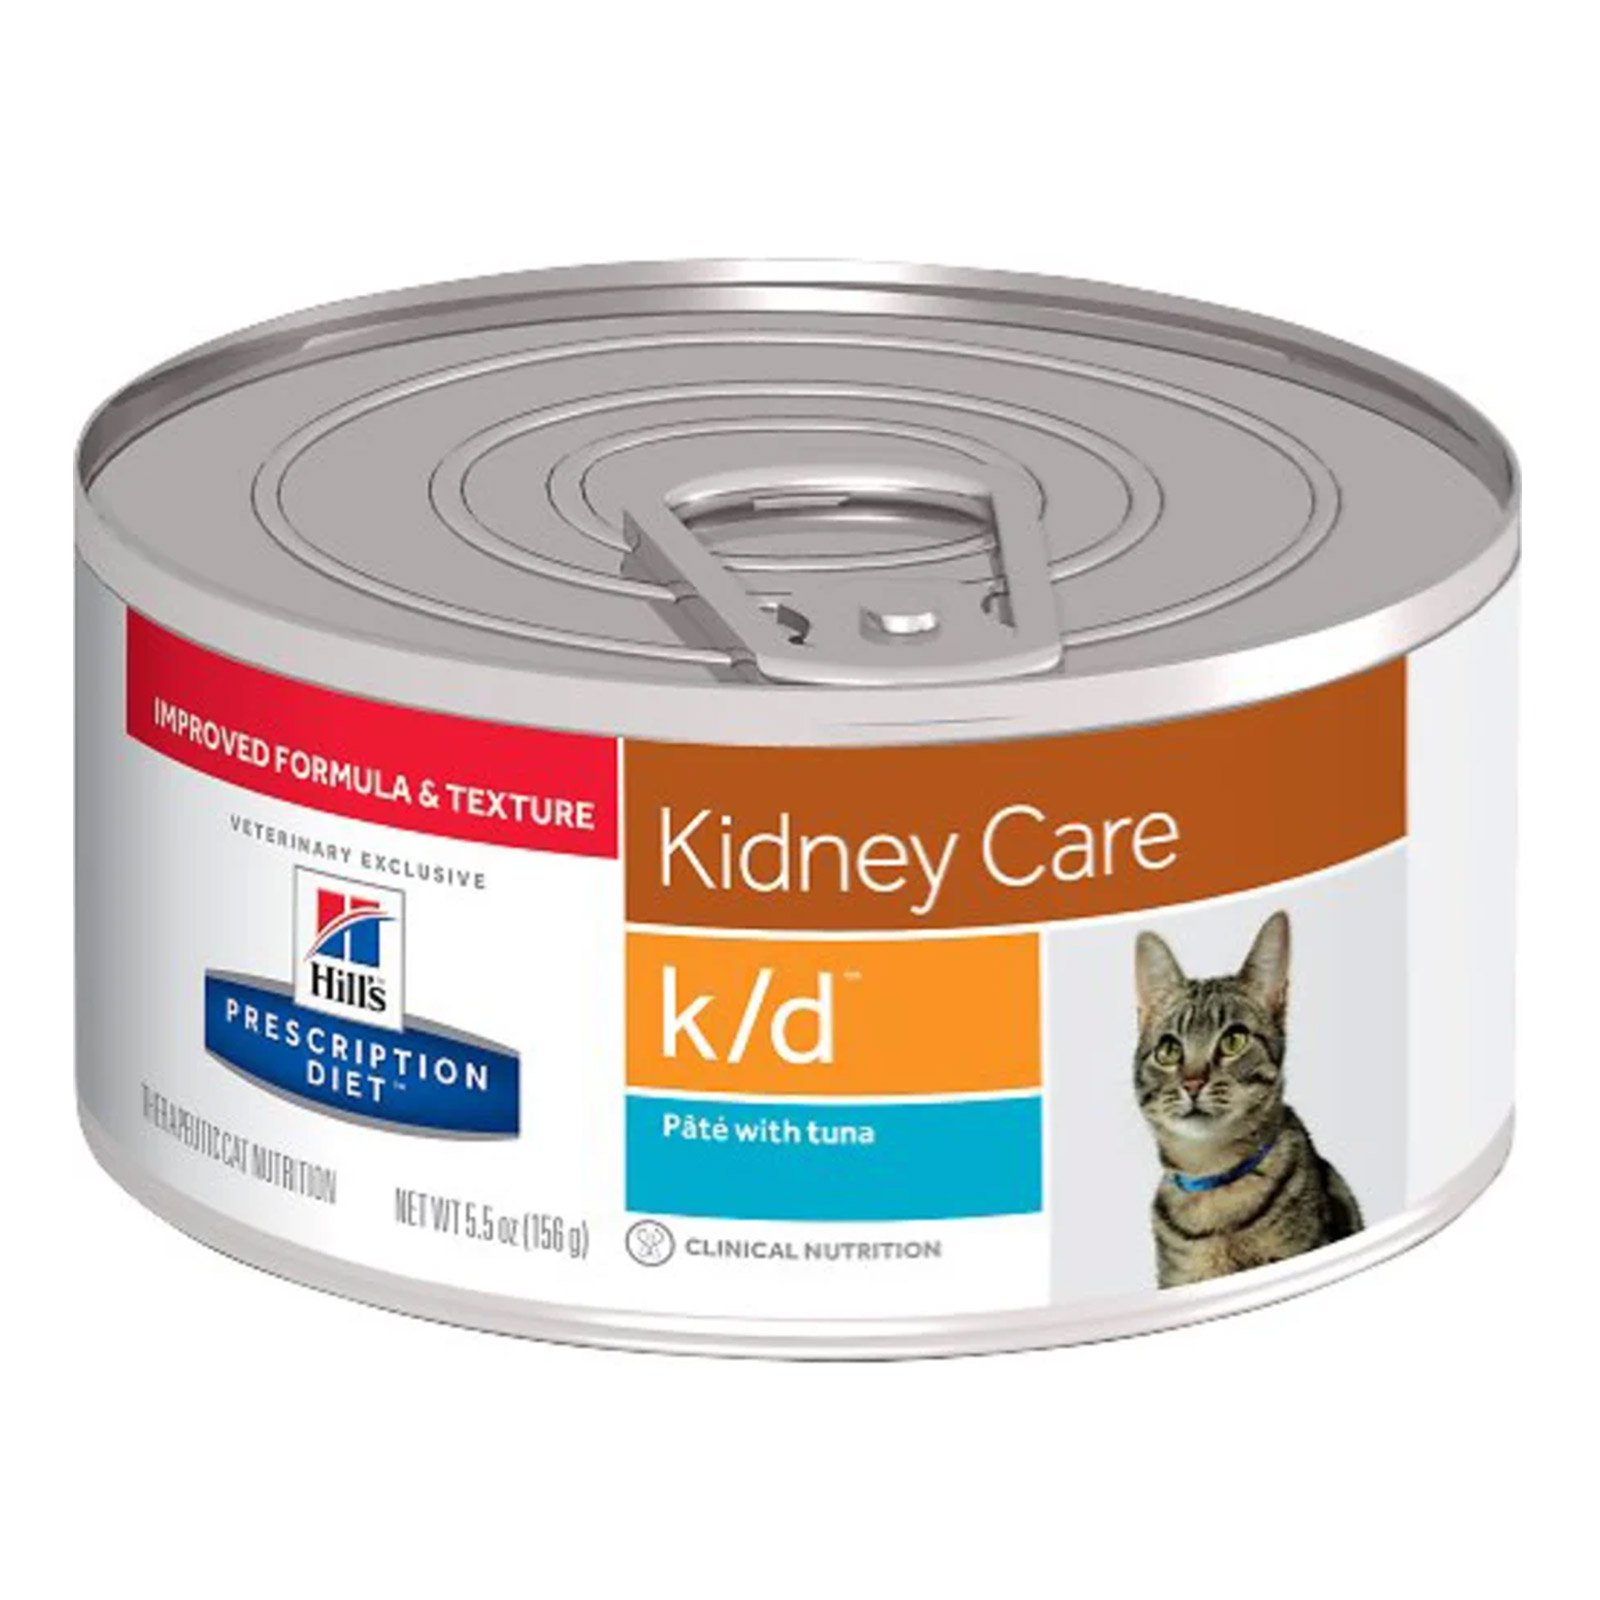 Hill's Prescription Diet k/d Kidney Care with Tuna Canned Cat Food 156 Gm